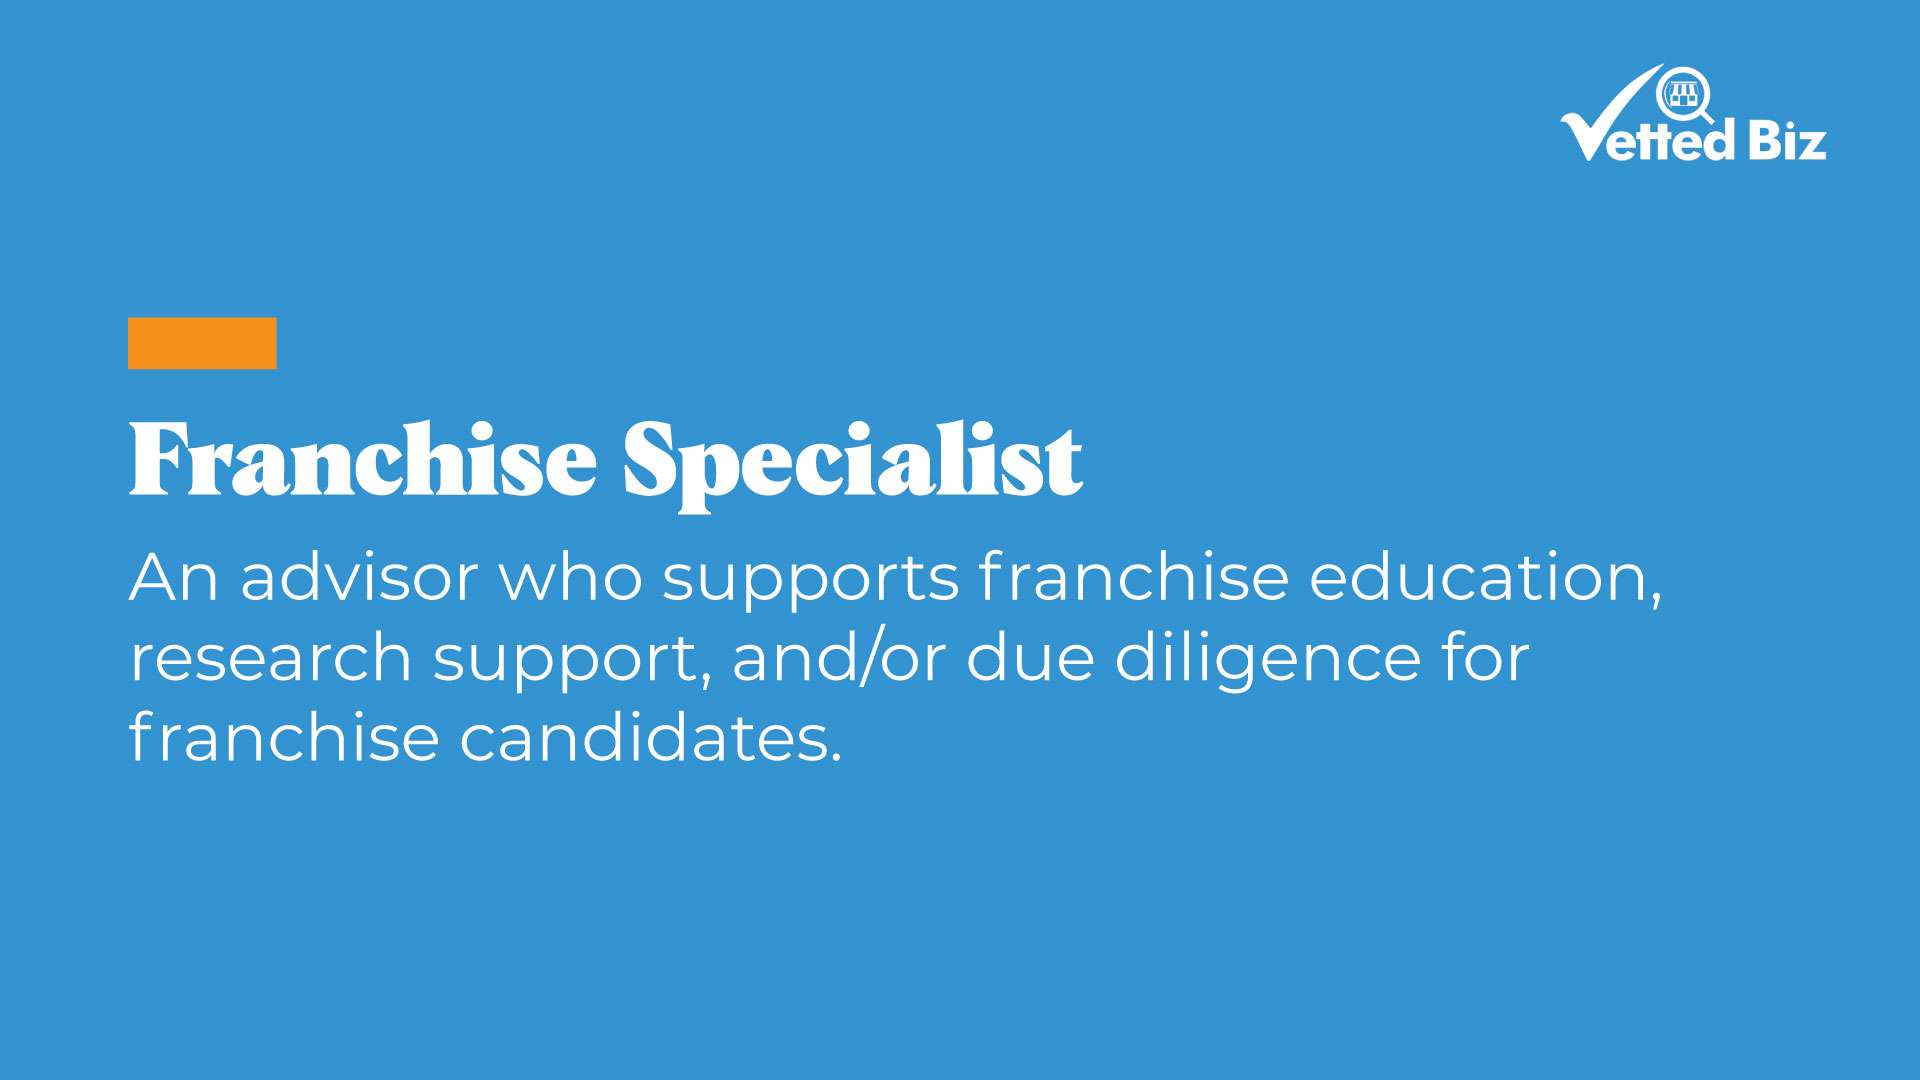 Franchise Specialist